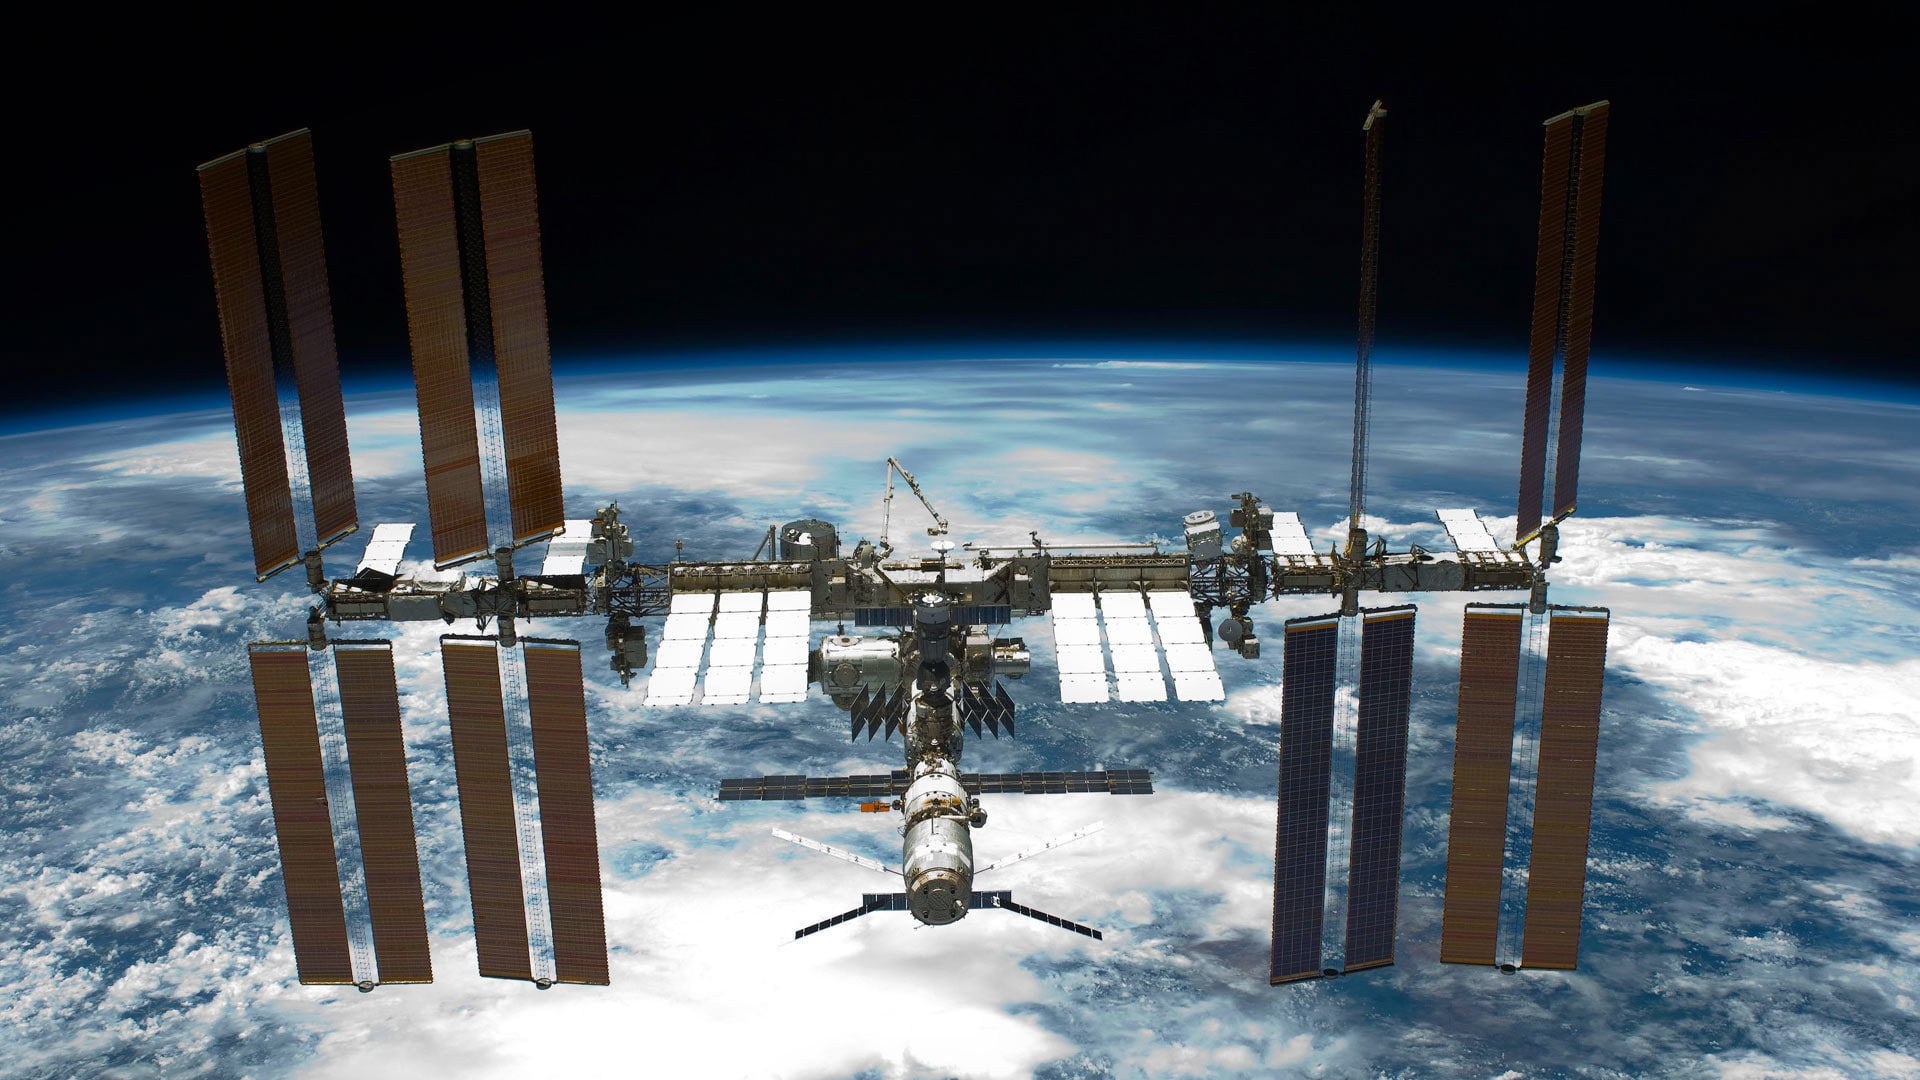 Iss Space Station - HD Wallpaper 